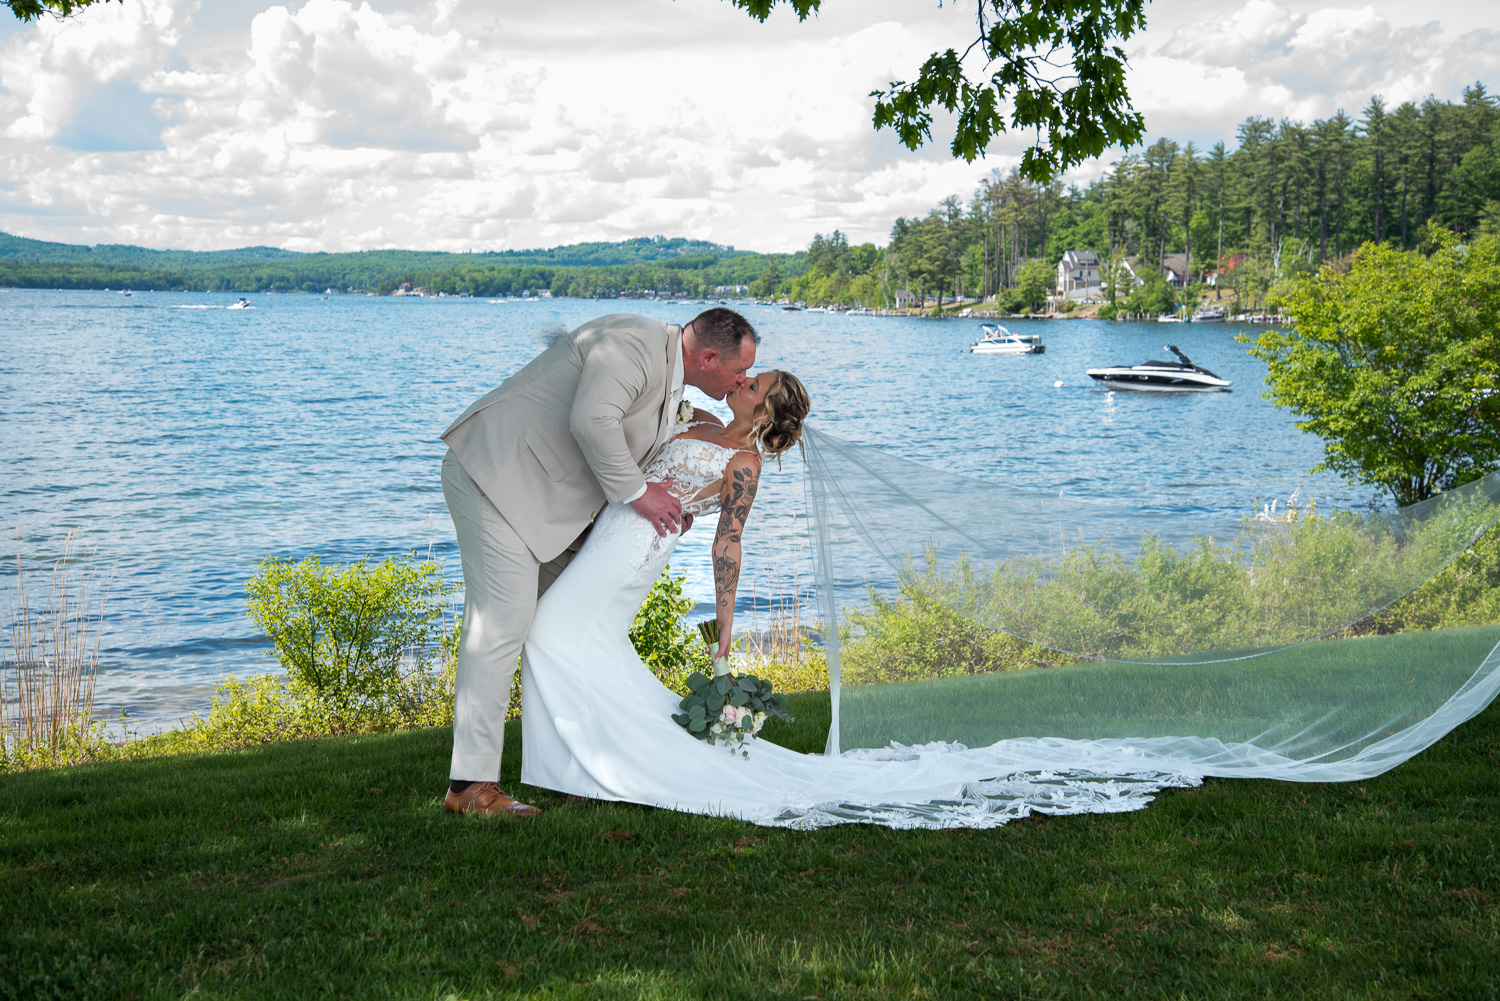 The groom dipping the bride after the Lake Winni Wedding